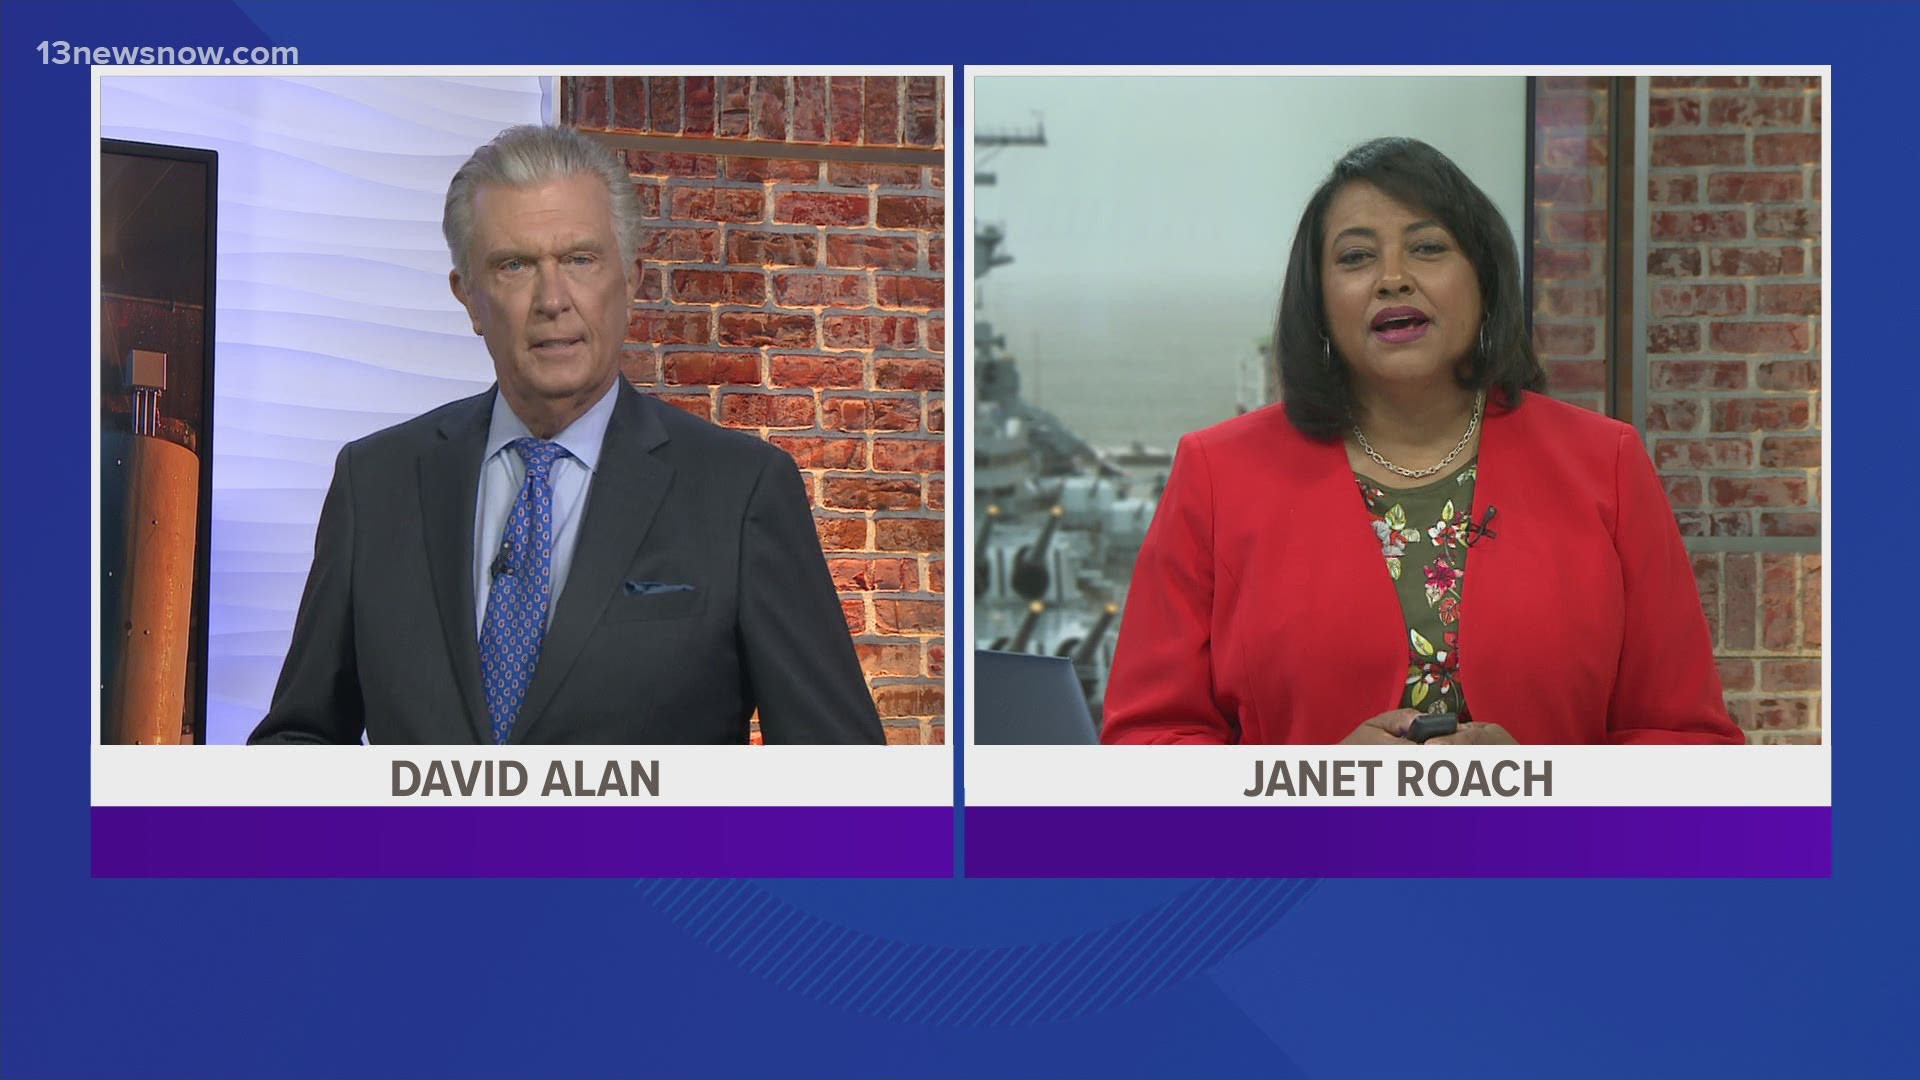 Top stories from 13News Now at 5 p.m. with David Alan and Janet Roach